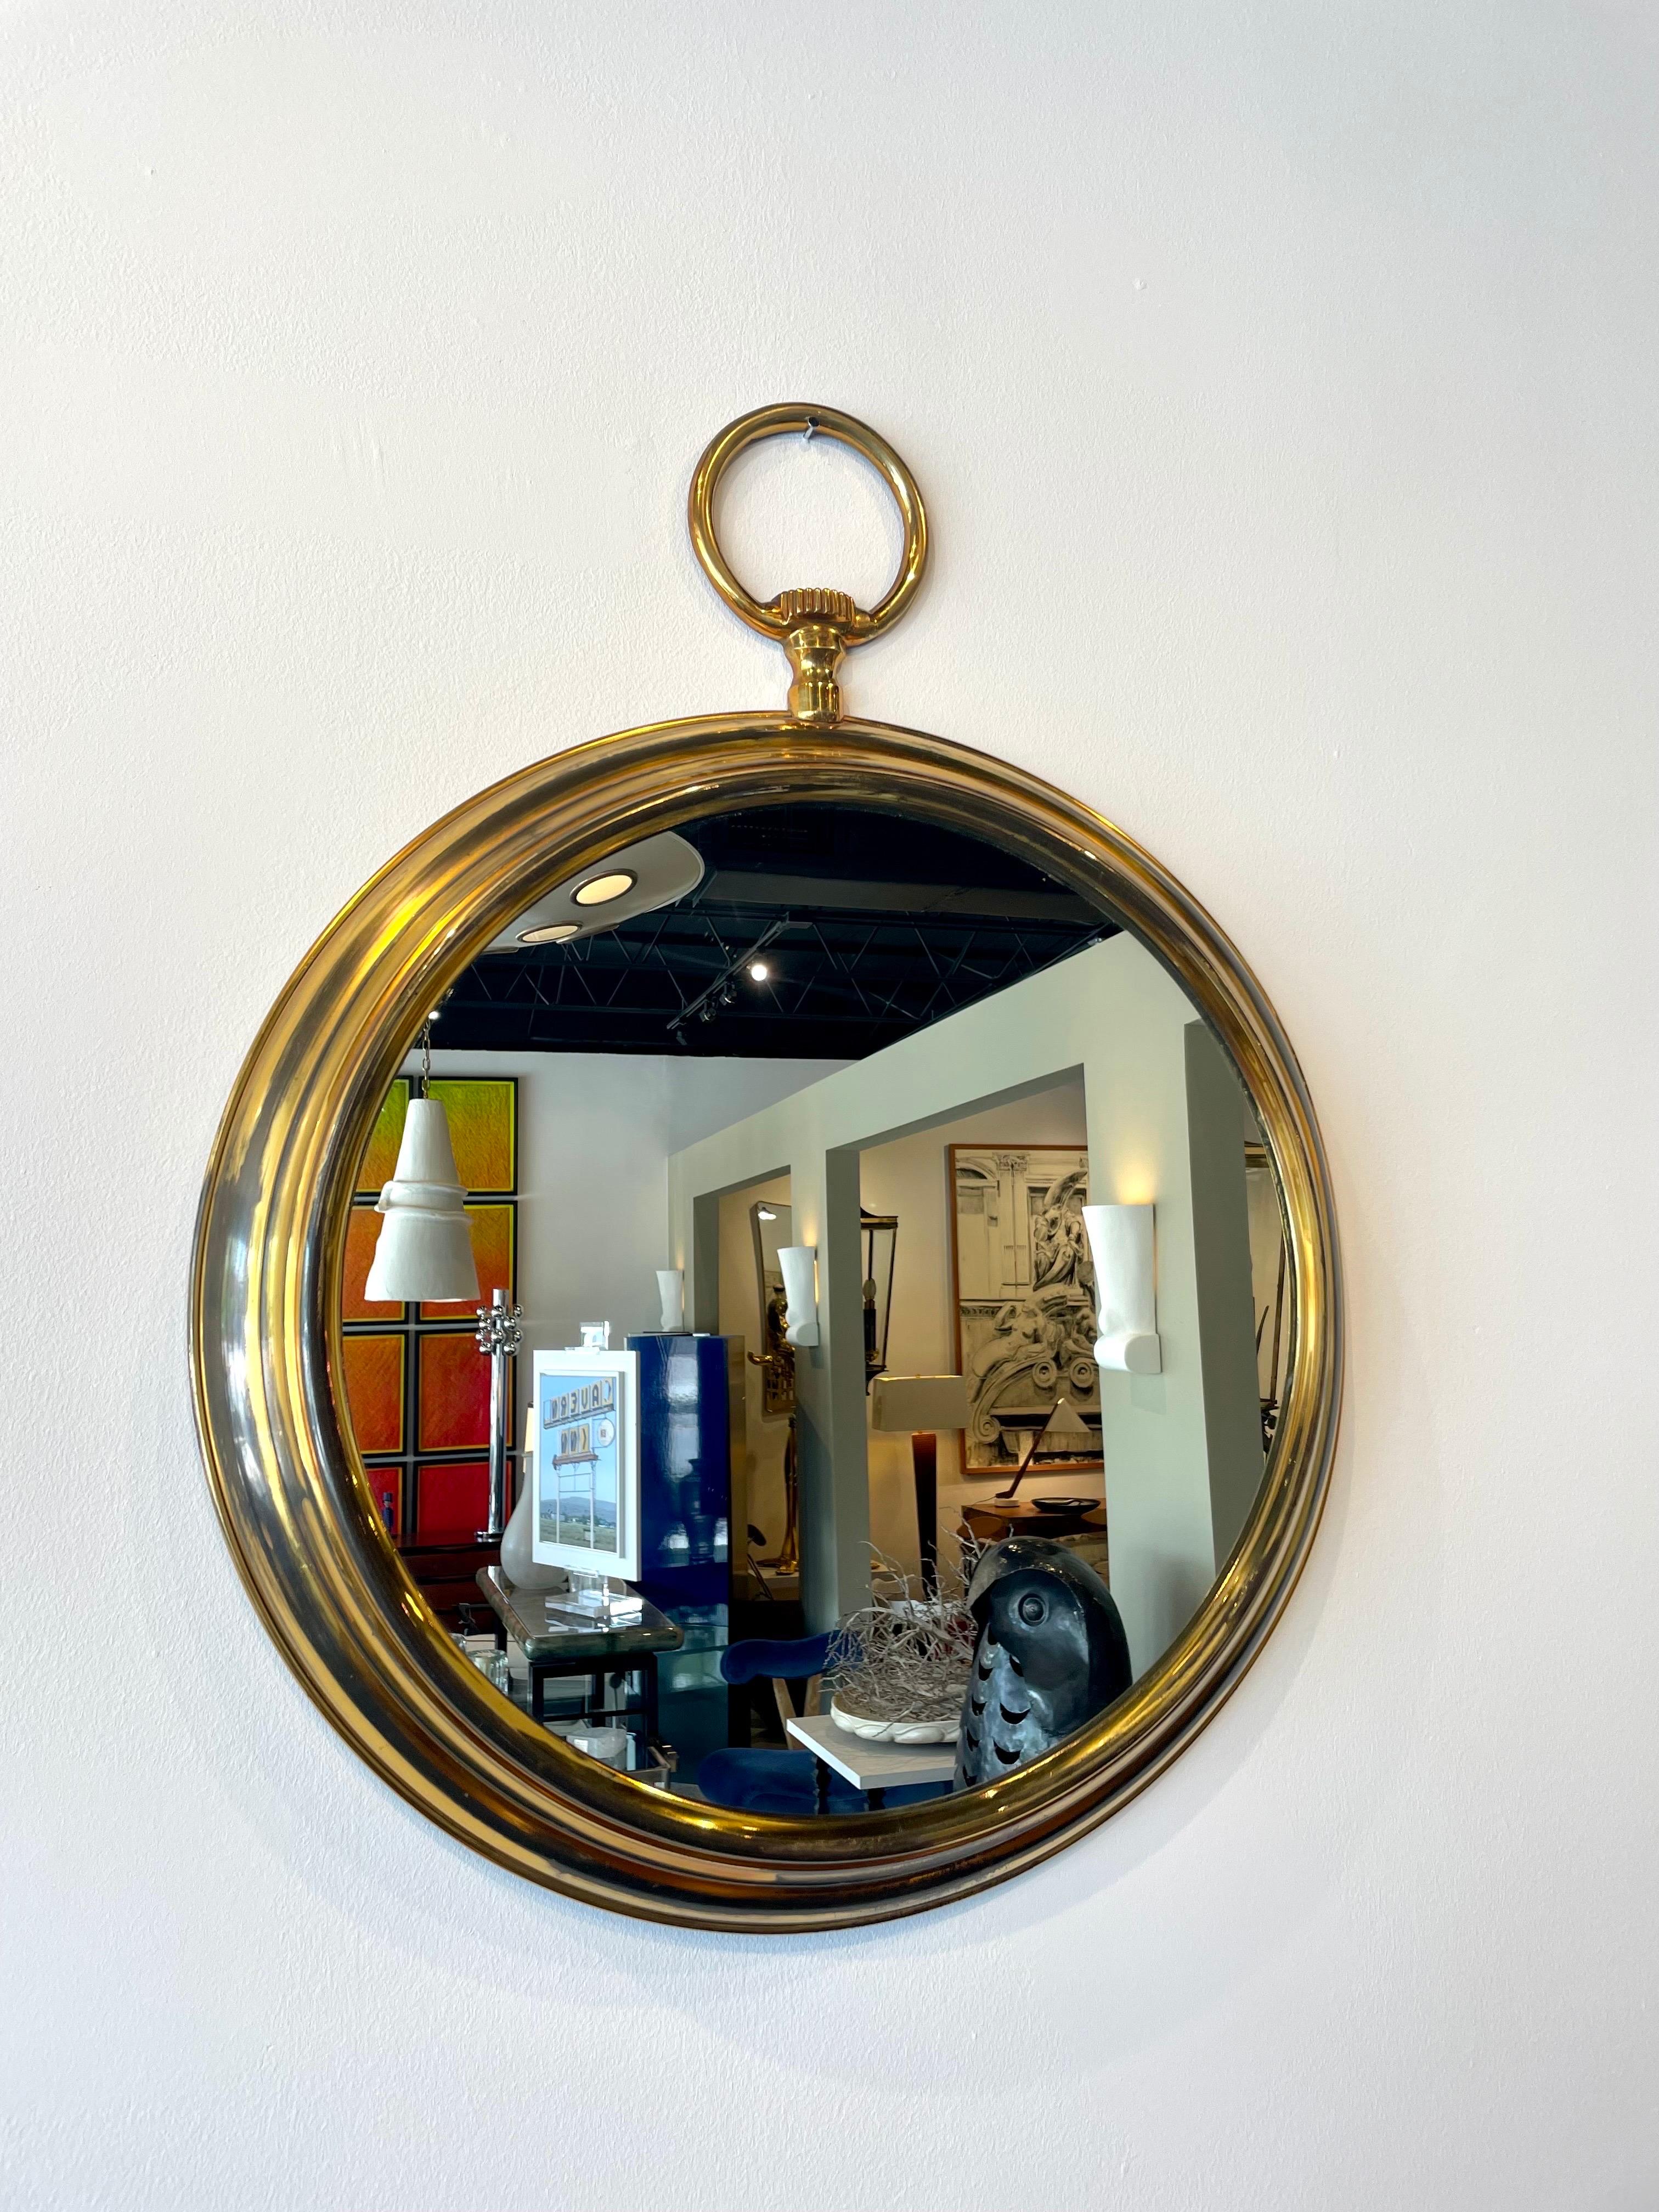 This very large (largest of its kind) eye-catching brass pocket watch shaped wall mirror in the style of Piero Fornasetti. Beautiful details from the winding mechanics to the waves of brass on frame. This wall mirror will be a nice midcentury